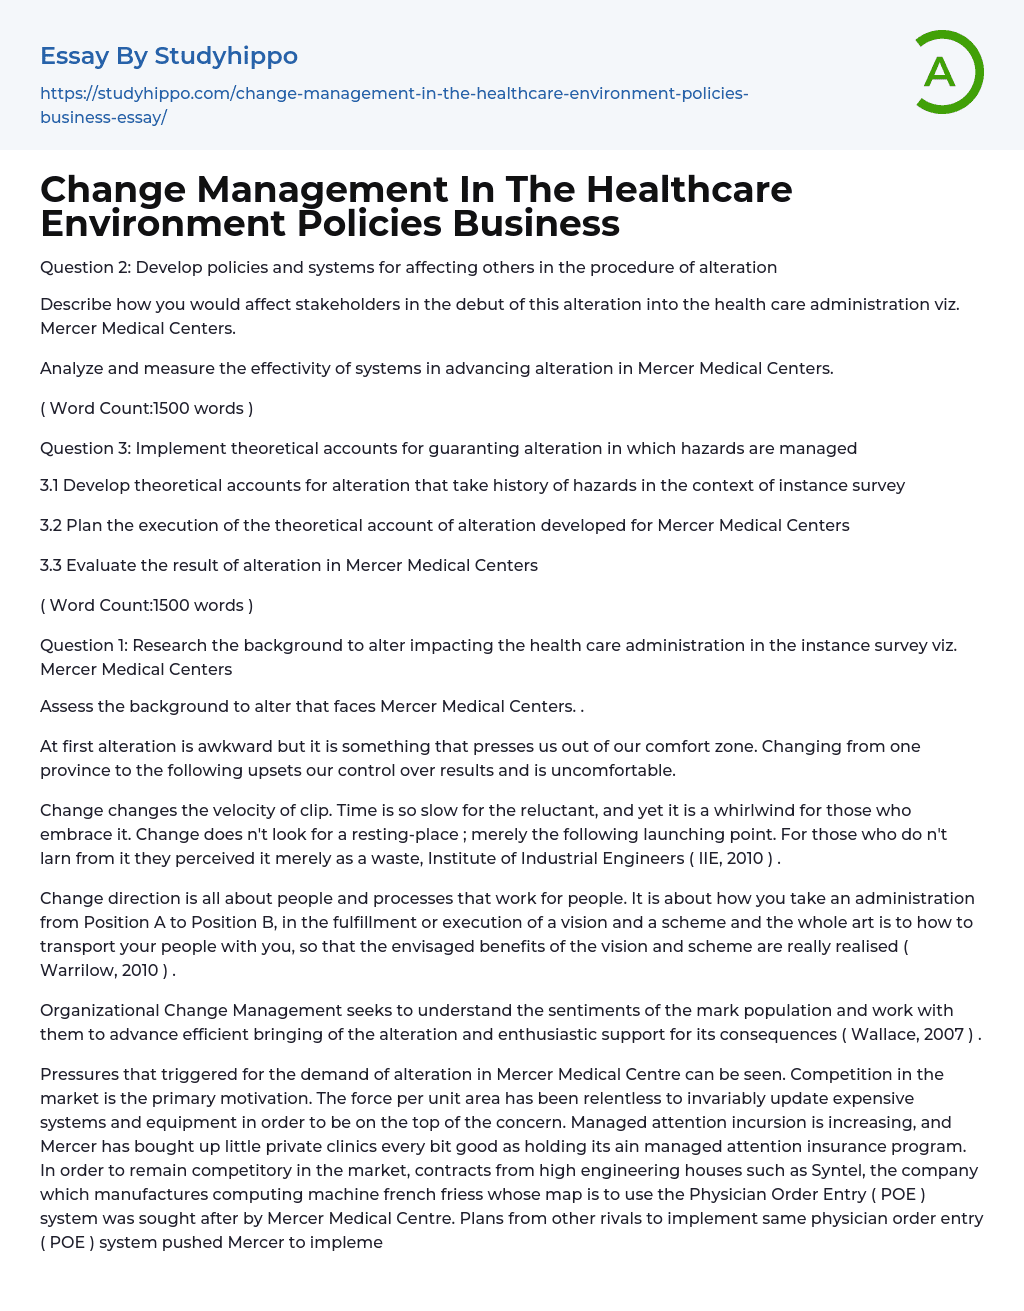 Change Management In The Healthcare Environment Policies Business Essay Example